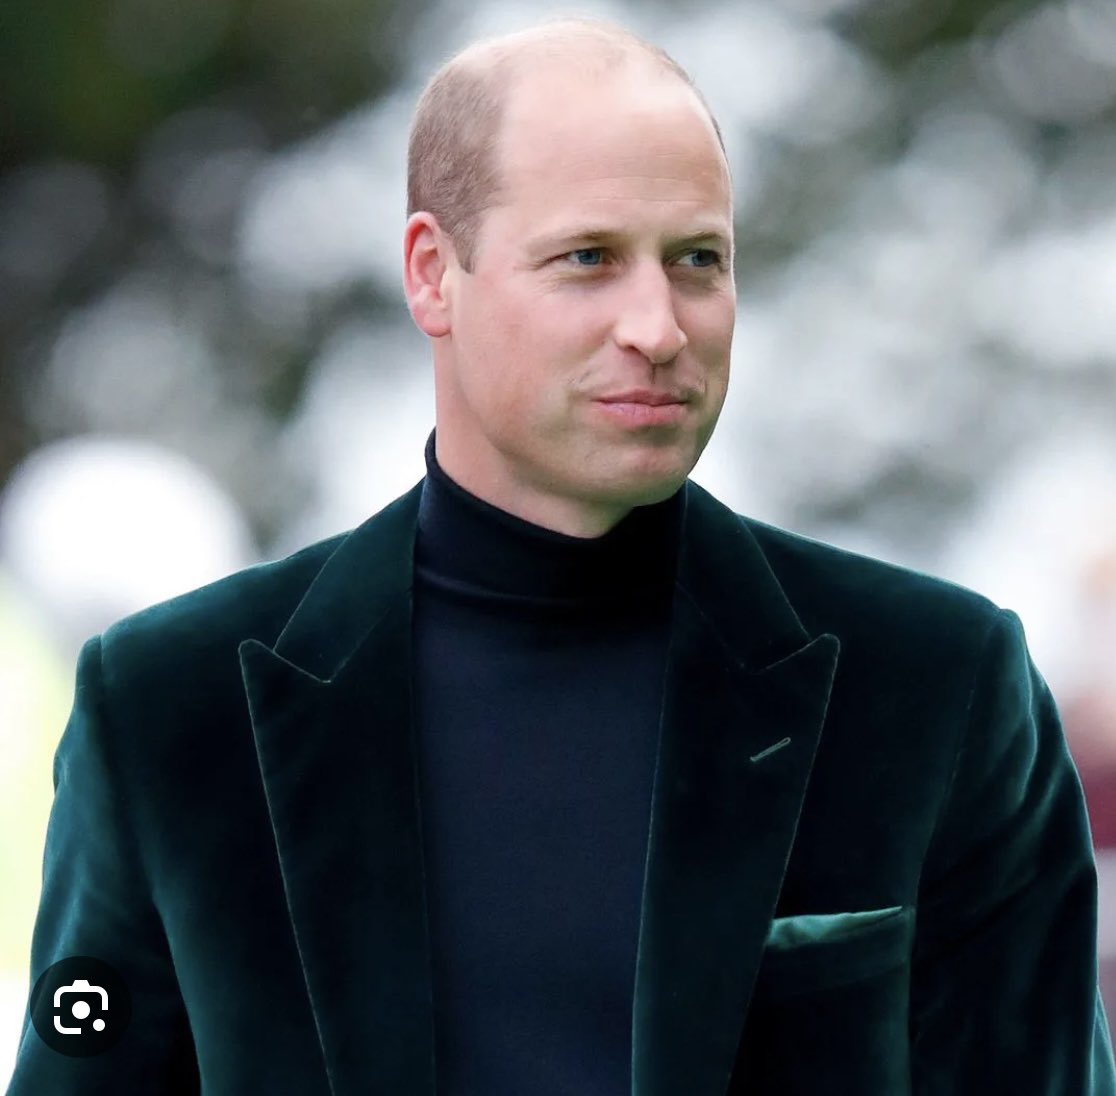 Happy Birthday Prince William. May your day be blessed 🎂🍾🥂🎁